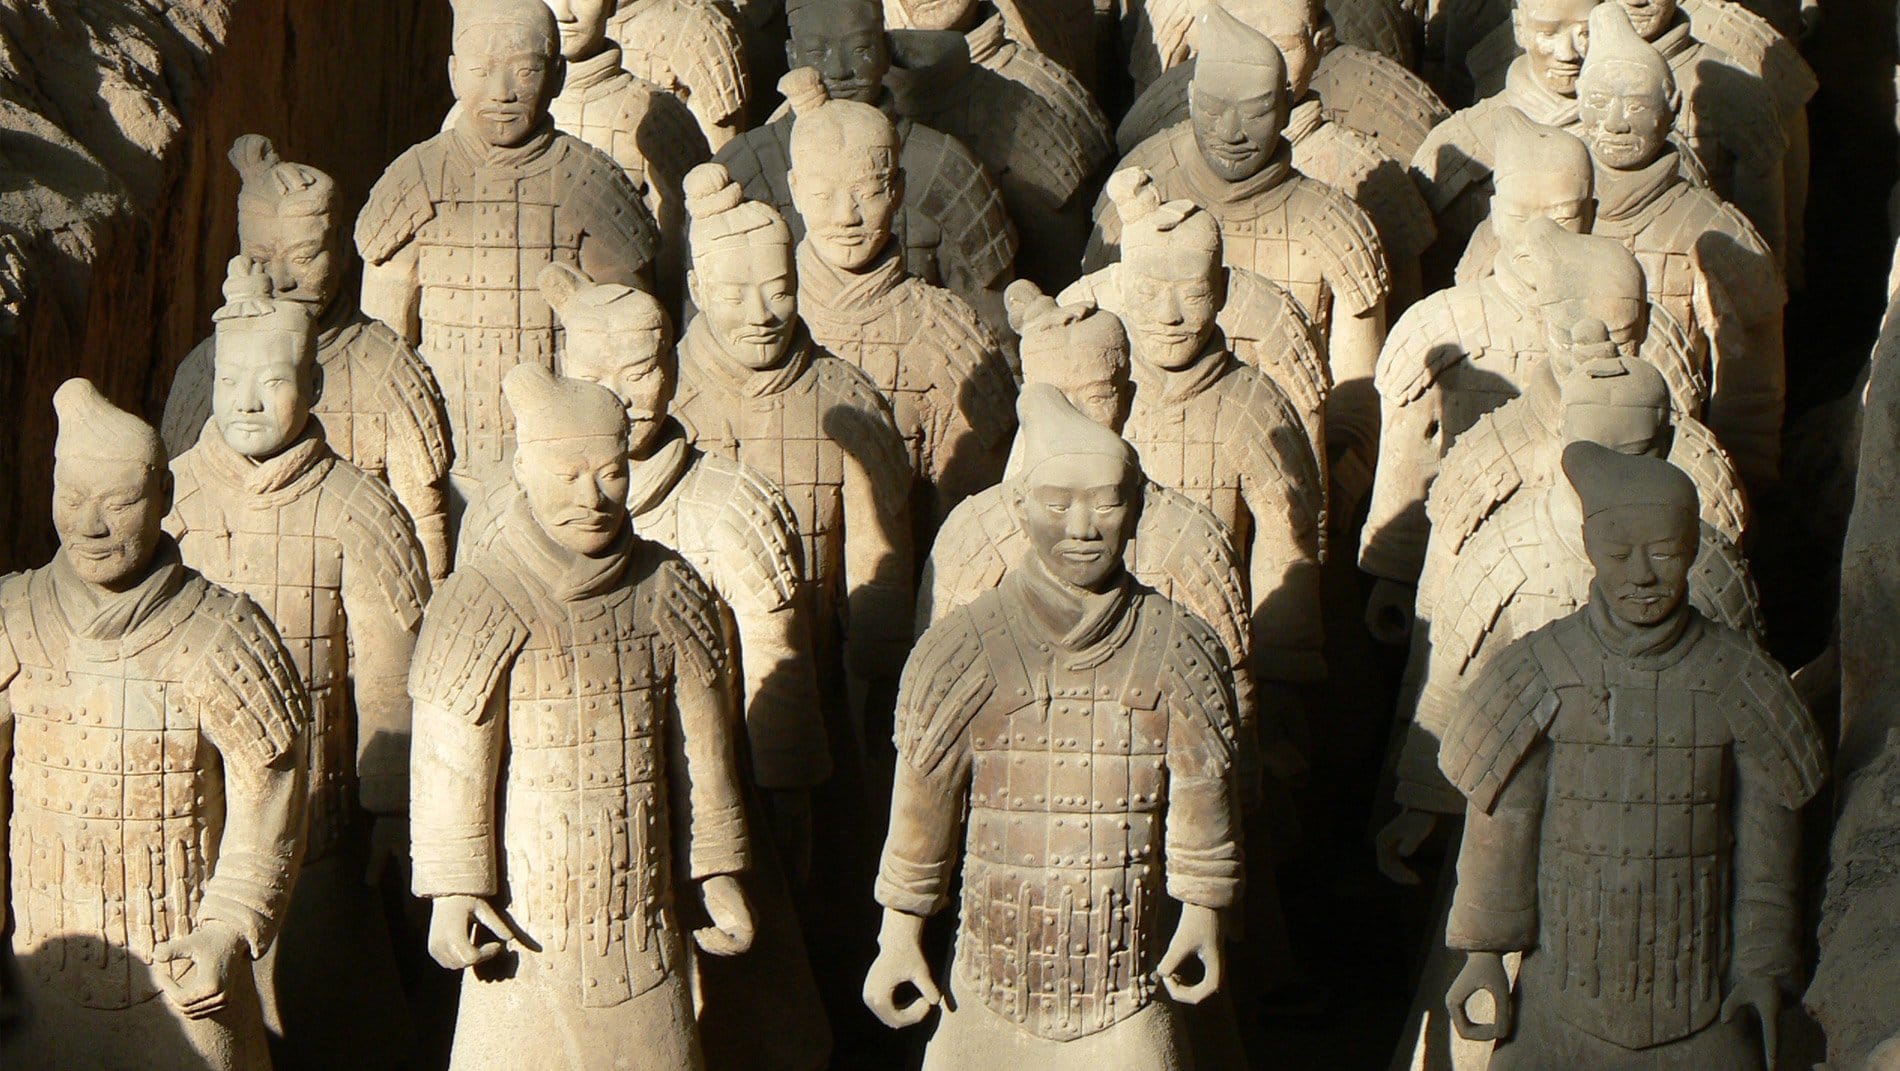 Terracotta Warriors~The three archaeological pits containing the Terracotta Army hold more than 8,000 soldiers, 130 chariots with 520 horses, and 150 cavalry horses.